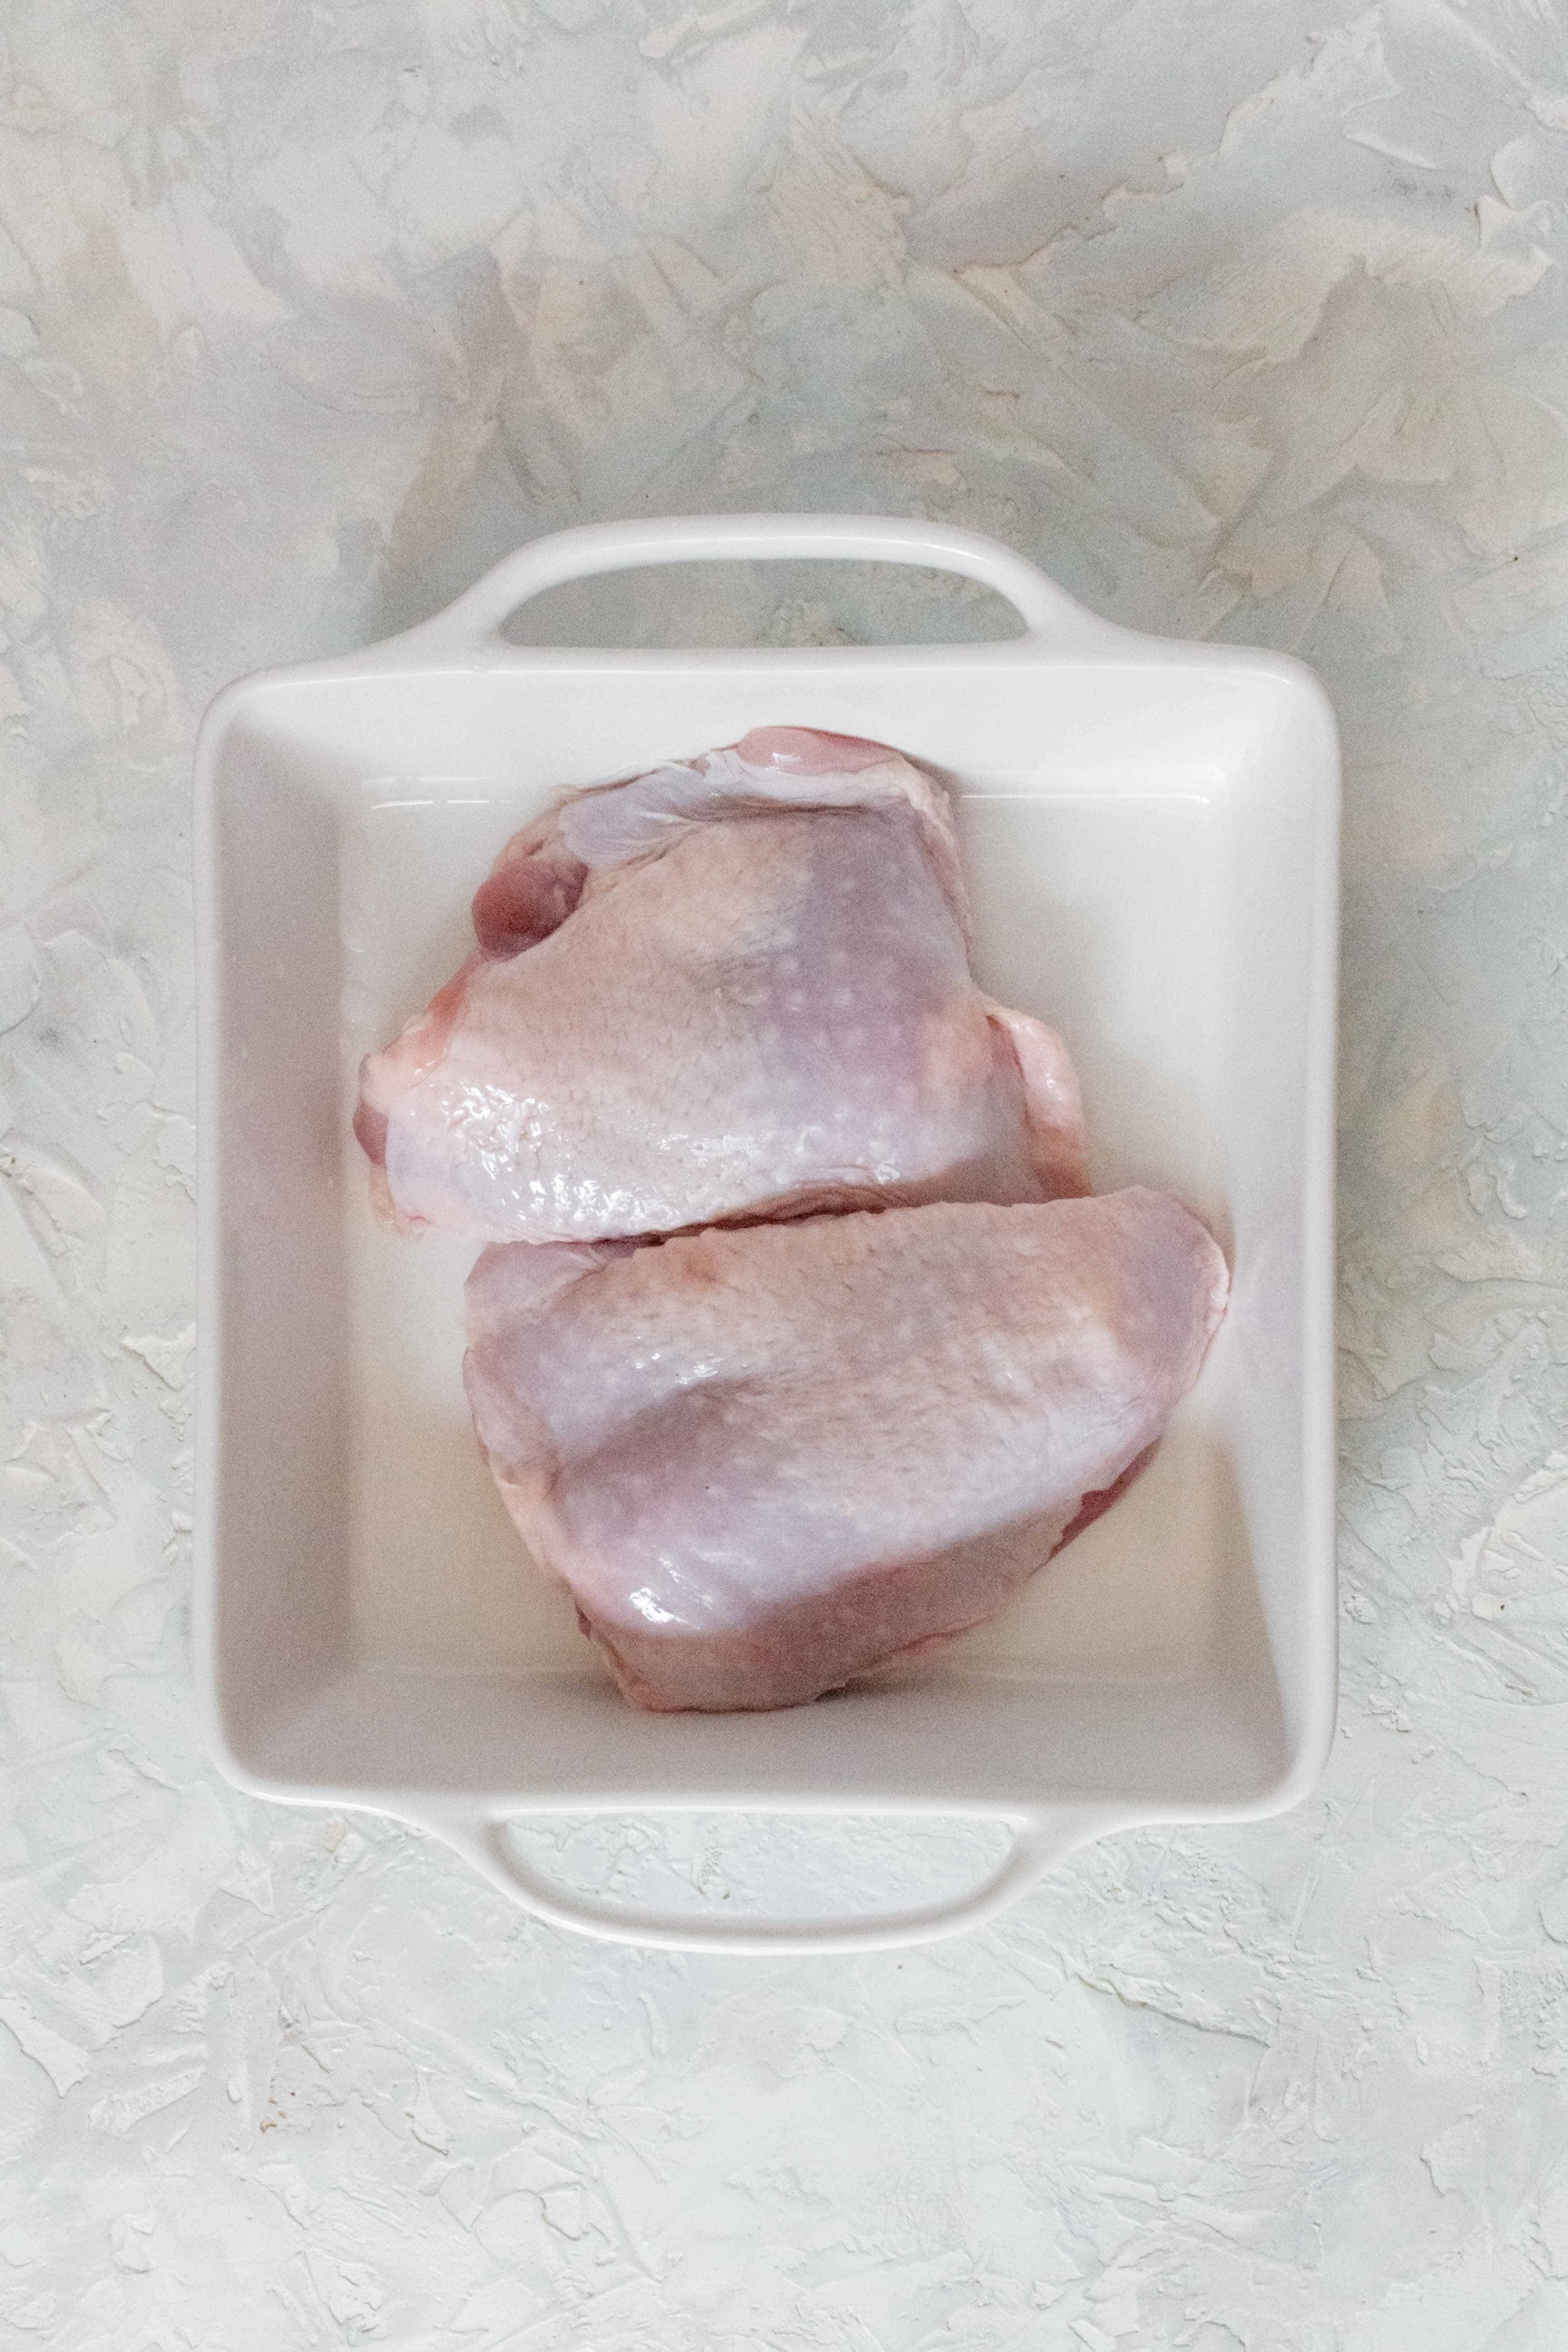 How To Roast Turkey Thighs in the Oven